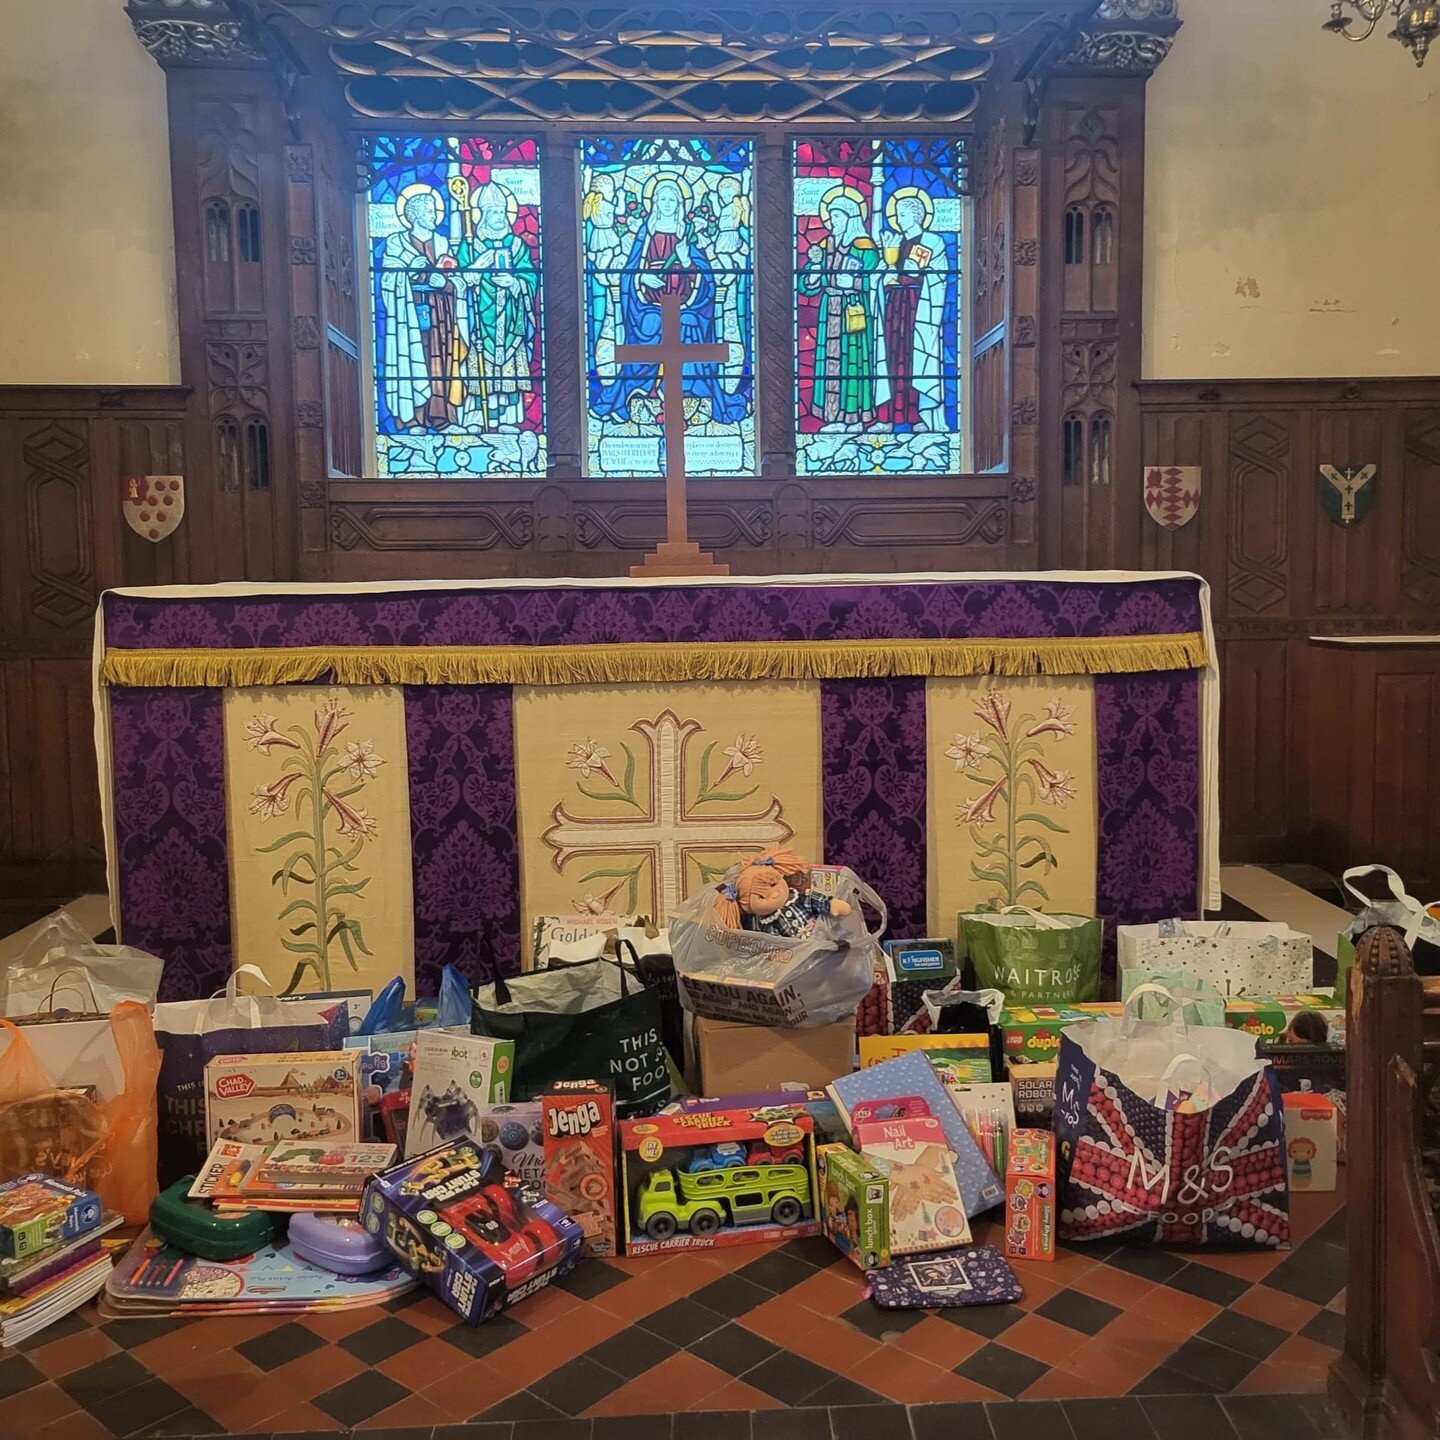 A huge thank you to our congregations who donated all of these fantastic new toys to Christan Care Merton so that families in need will receive presents.